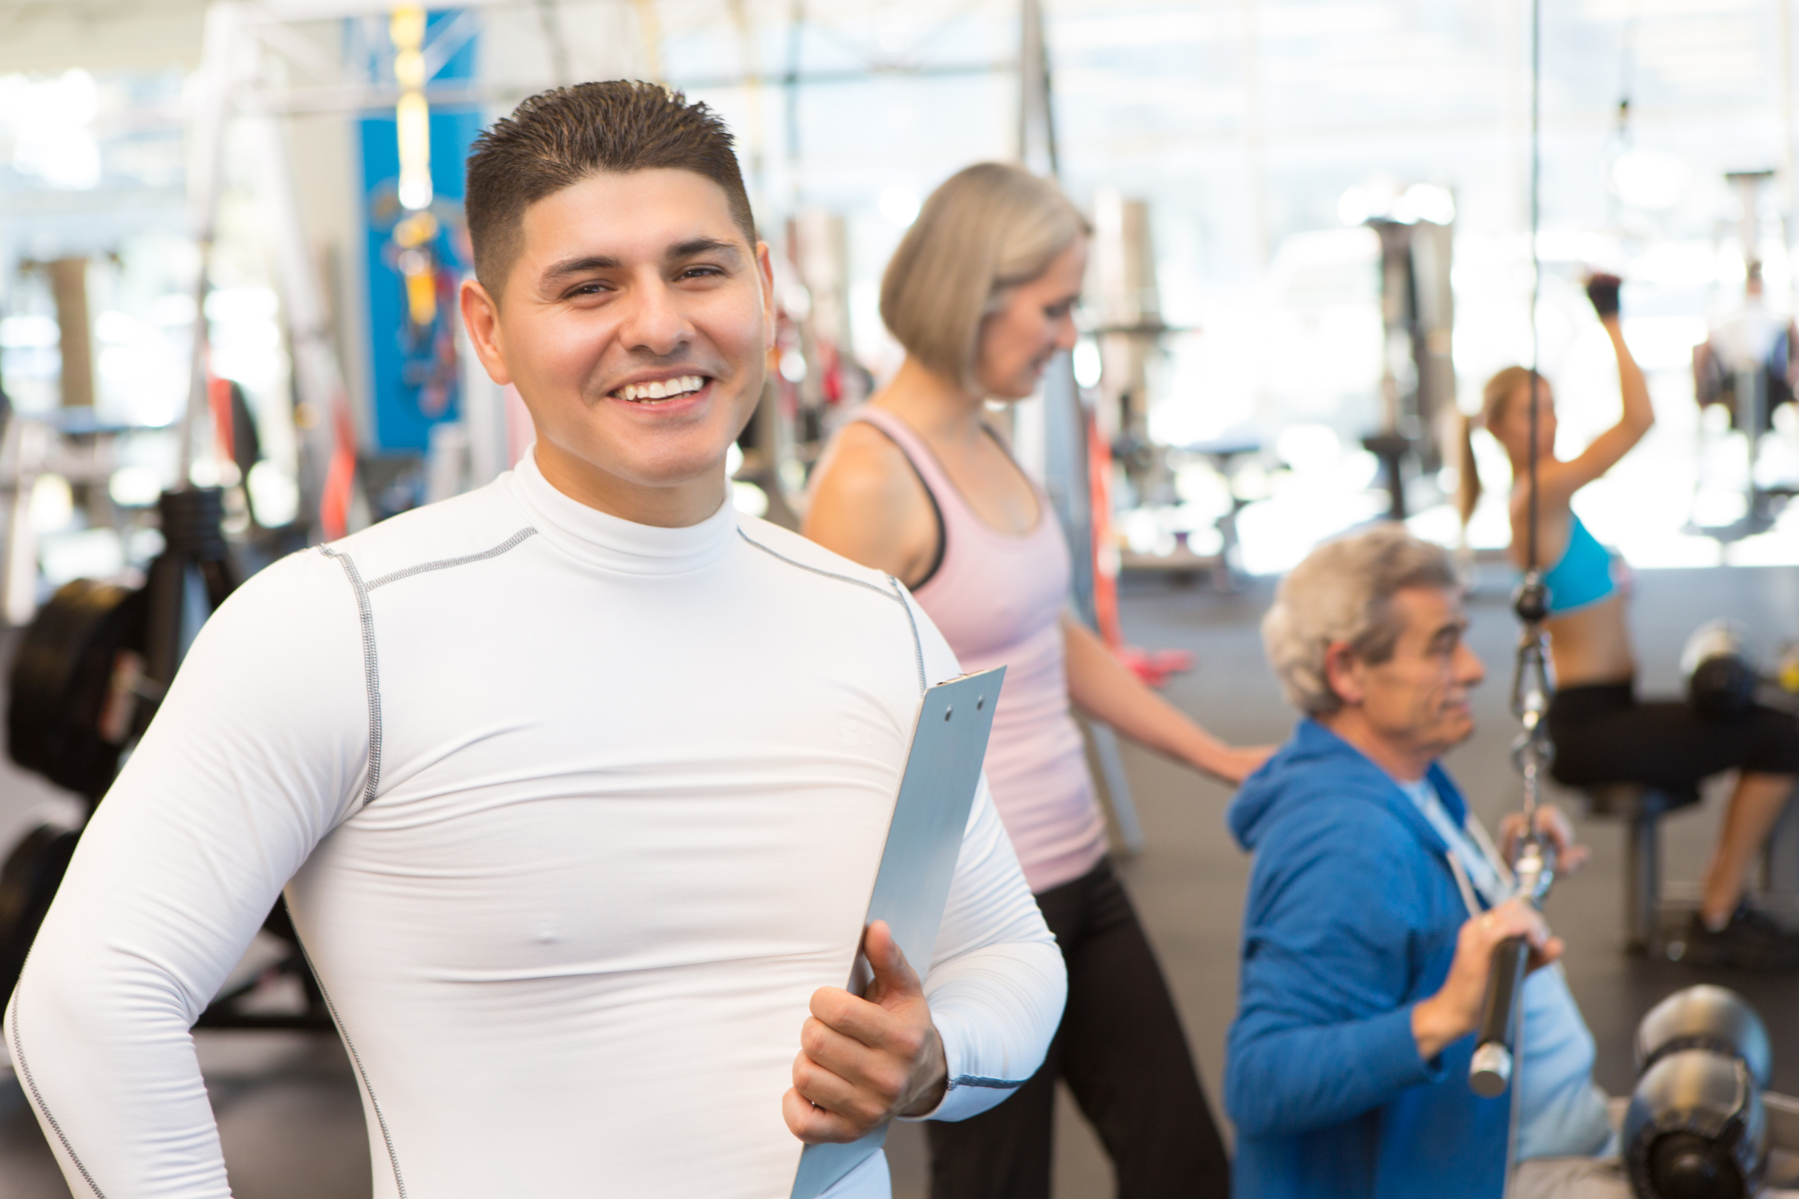 5 things to know about Personal Training at David Lloyd Clubs - David Lloyd  Blog, Fitness, Nutrition